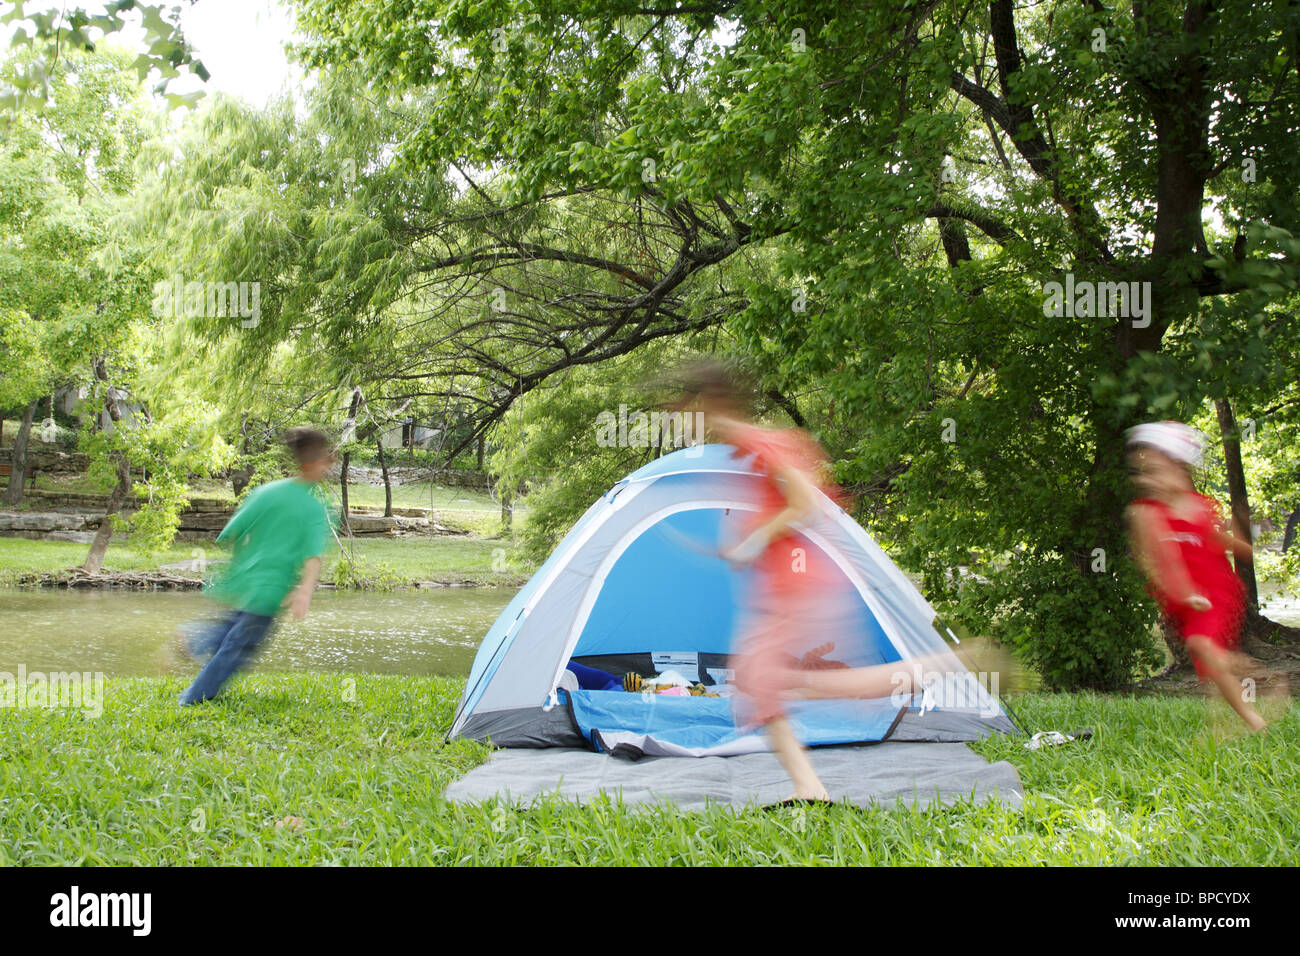 Kids chasing each other around a tent while camping Stock Photo